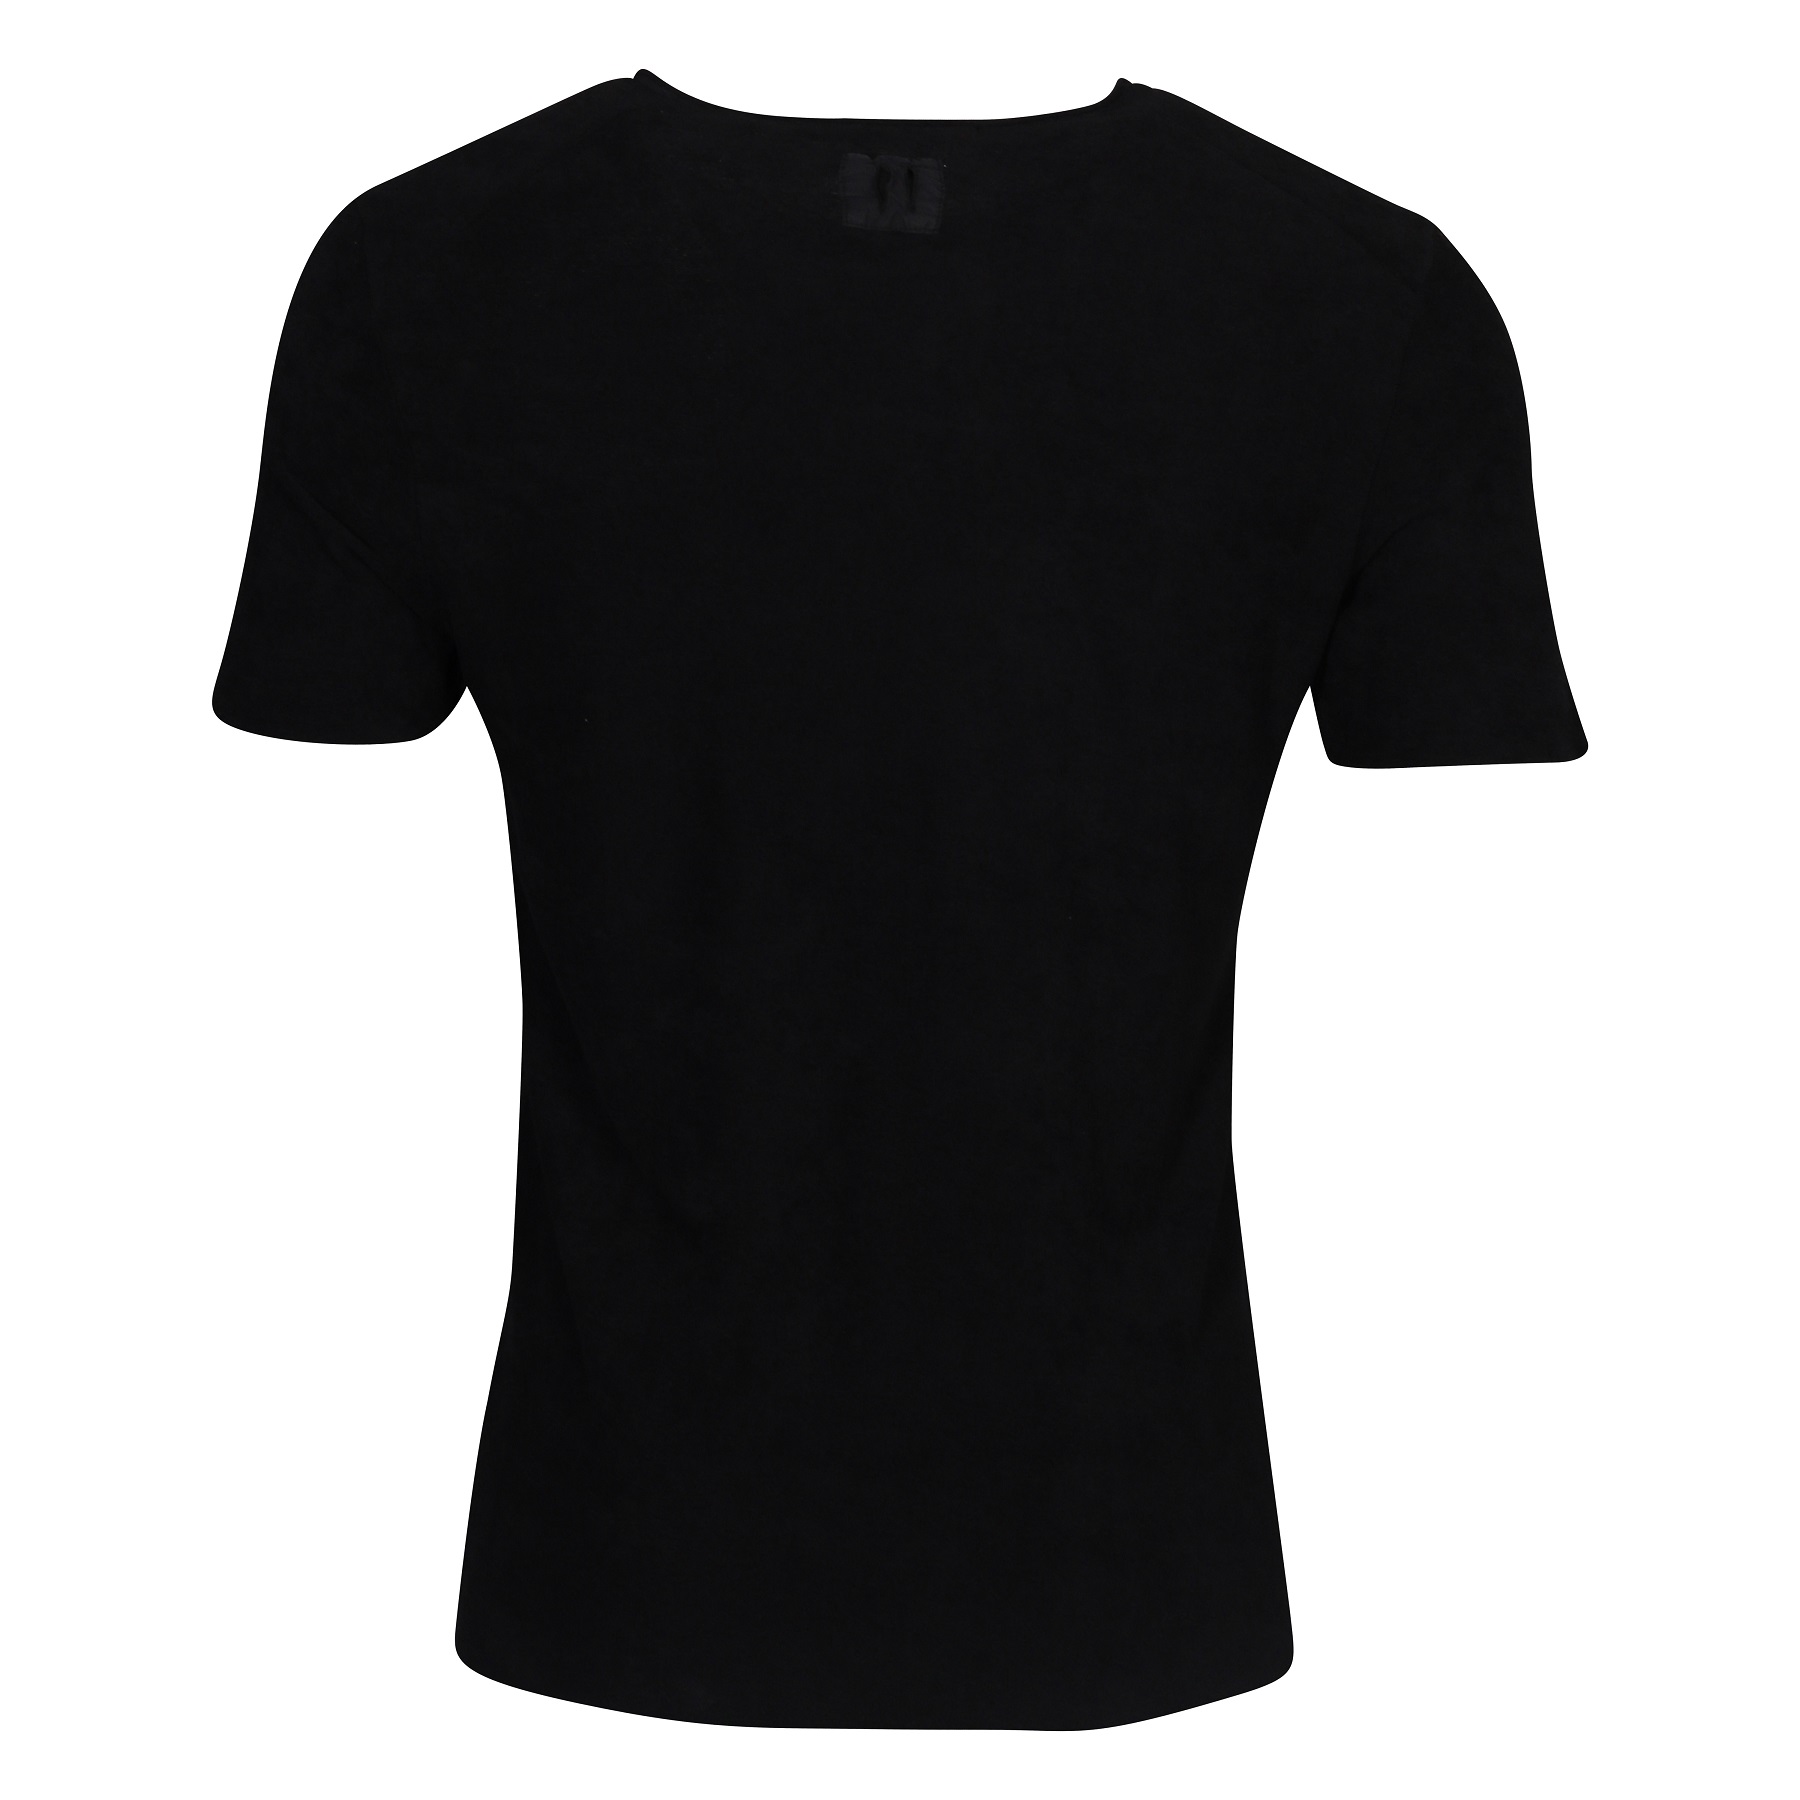 HANNES ROETHER Terry T-Shirt in Black M